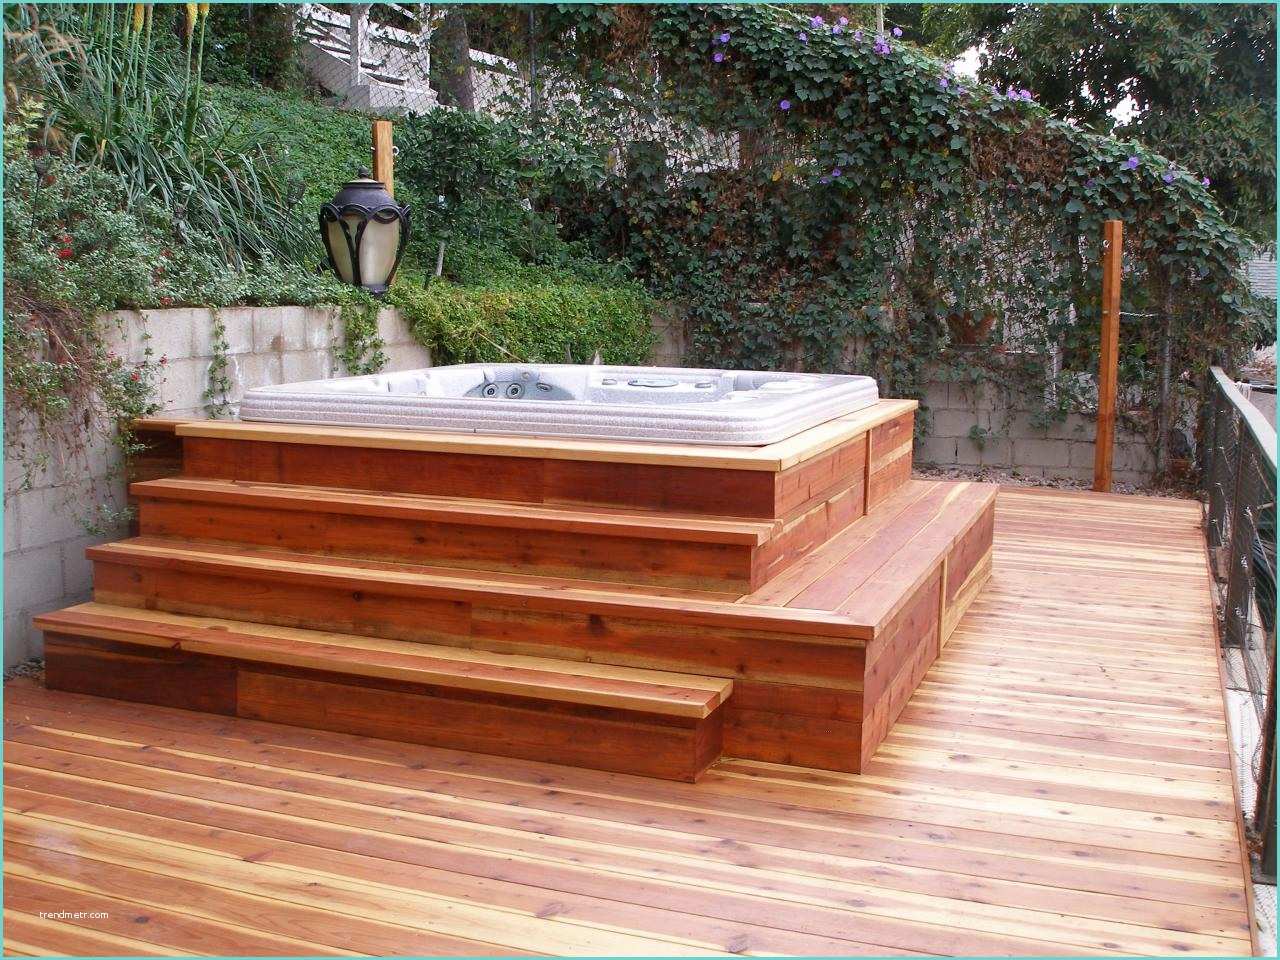 Steps for Hot Tub Wooden Deck Hot Tub with Stairs Surrounded by Lush